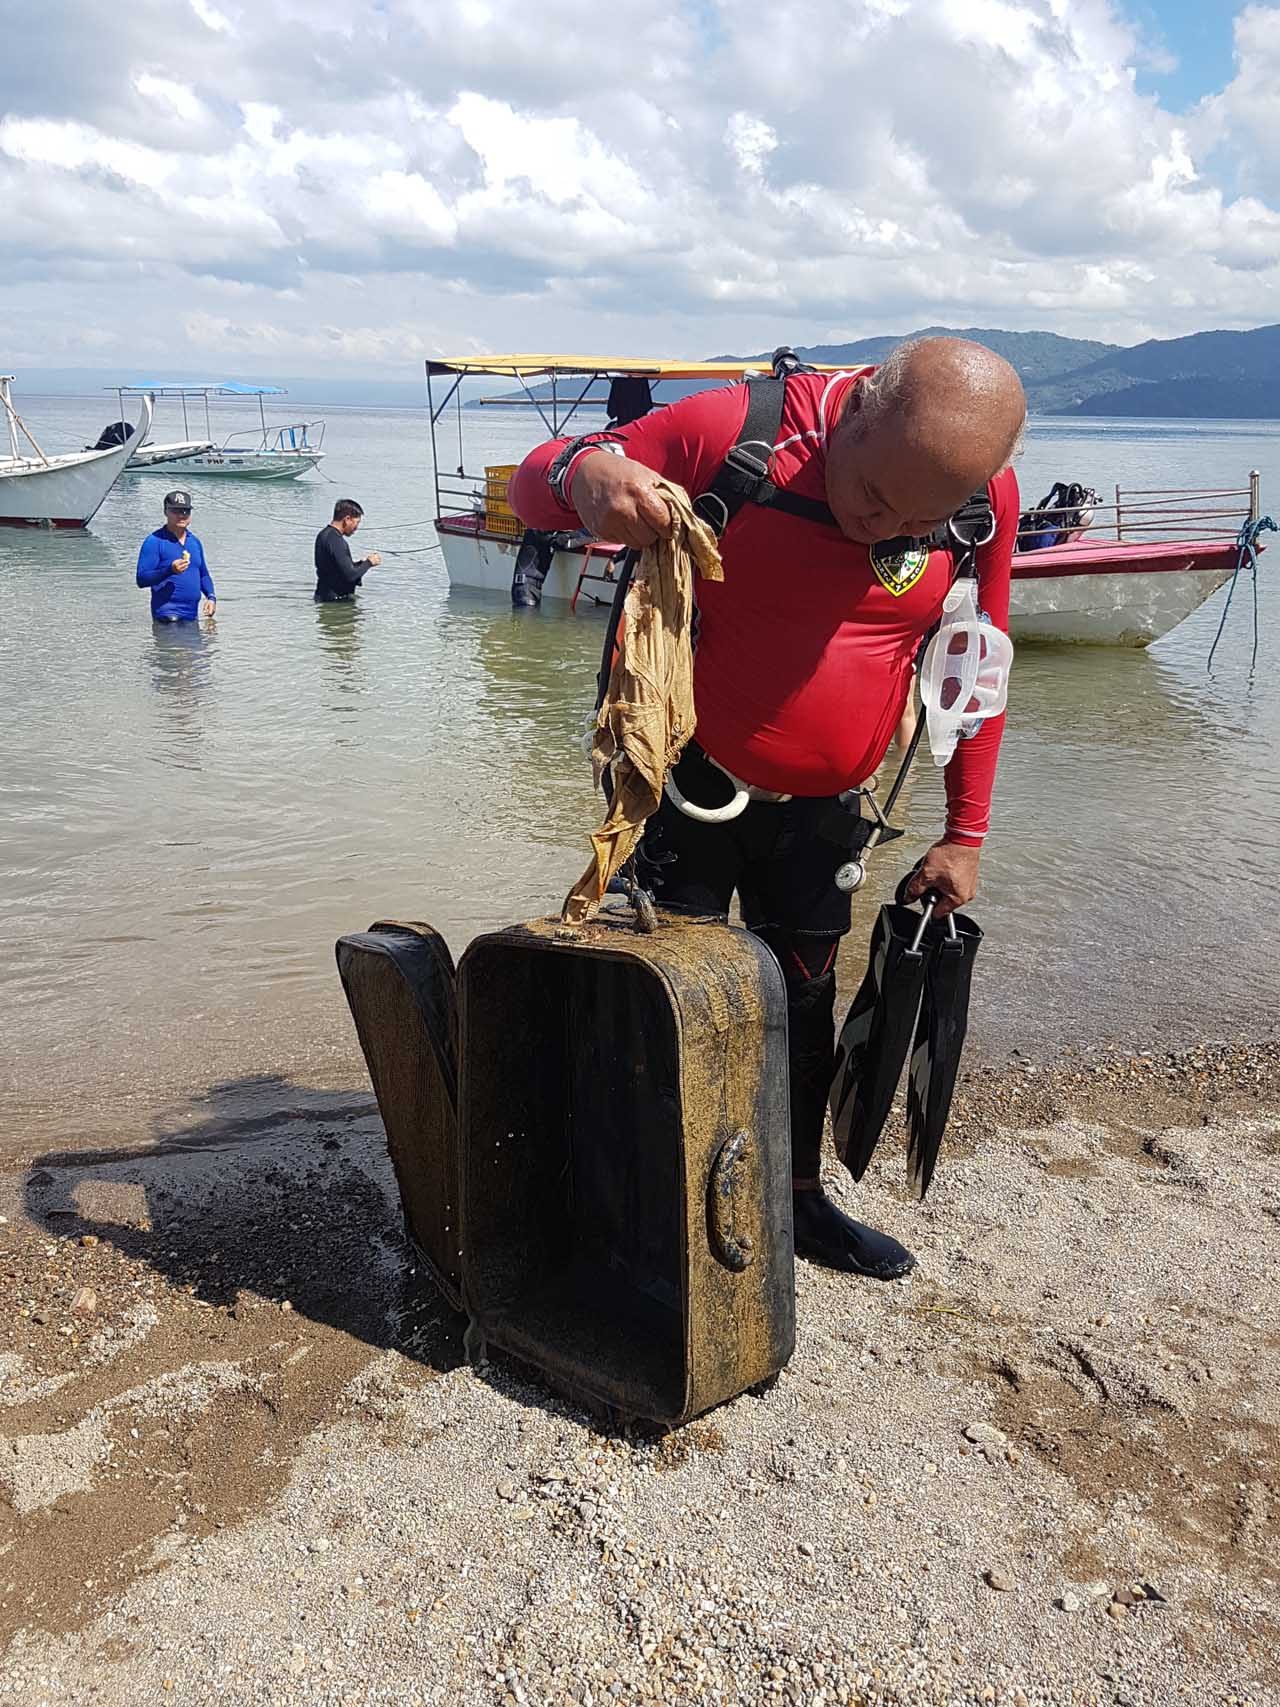 LUGGAGE. An empty luggage is among the trash recovered from the sea. Photo by Tina Ganzon-Ozaeta/Rappler 